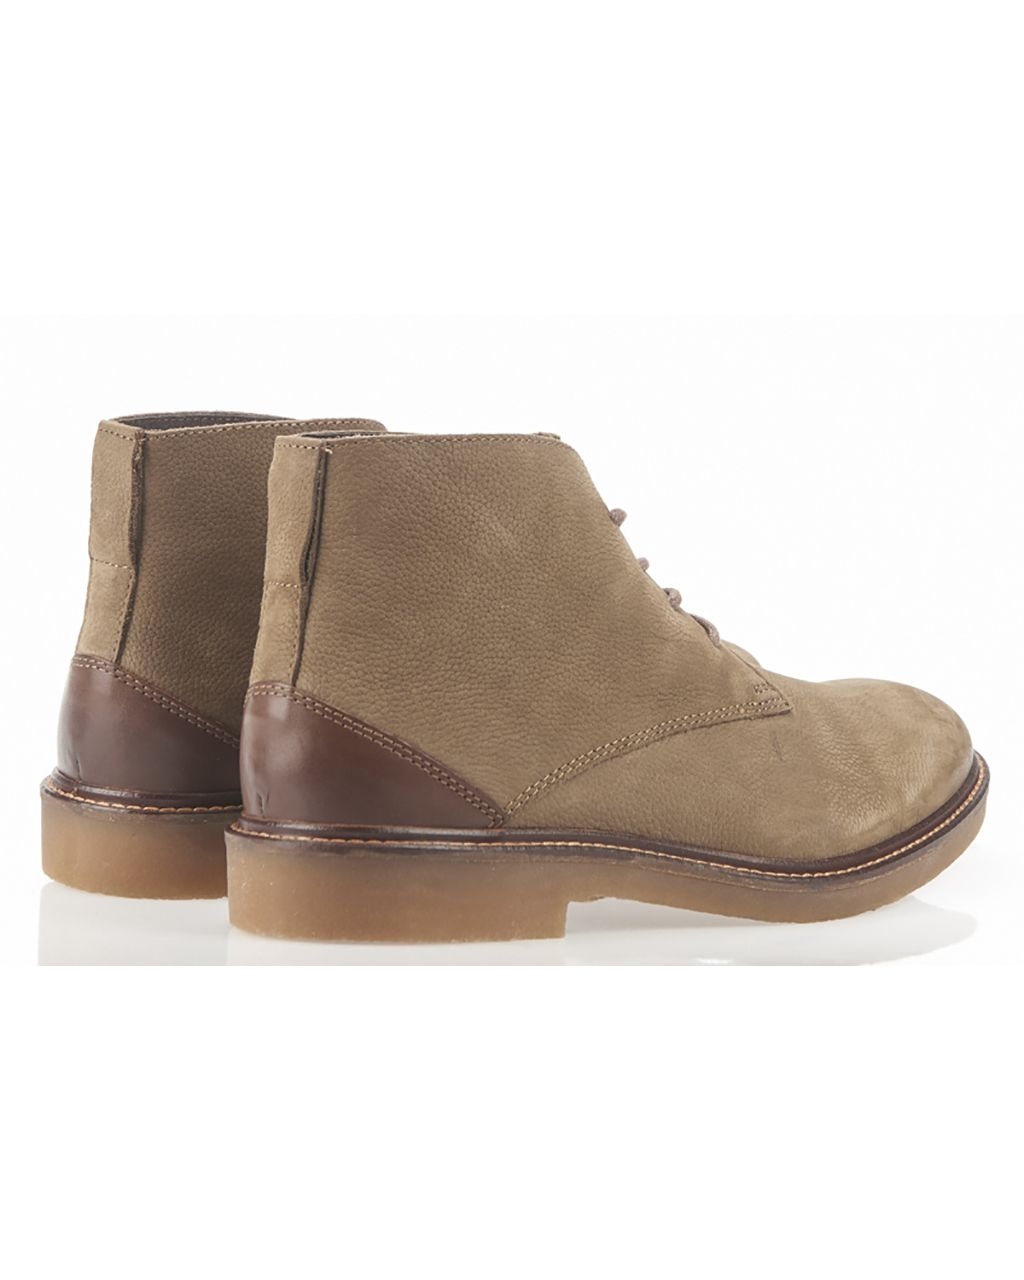 Campbell Classic Casual Boots Lichtbruin uni 070110-003-40